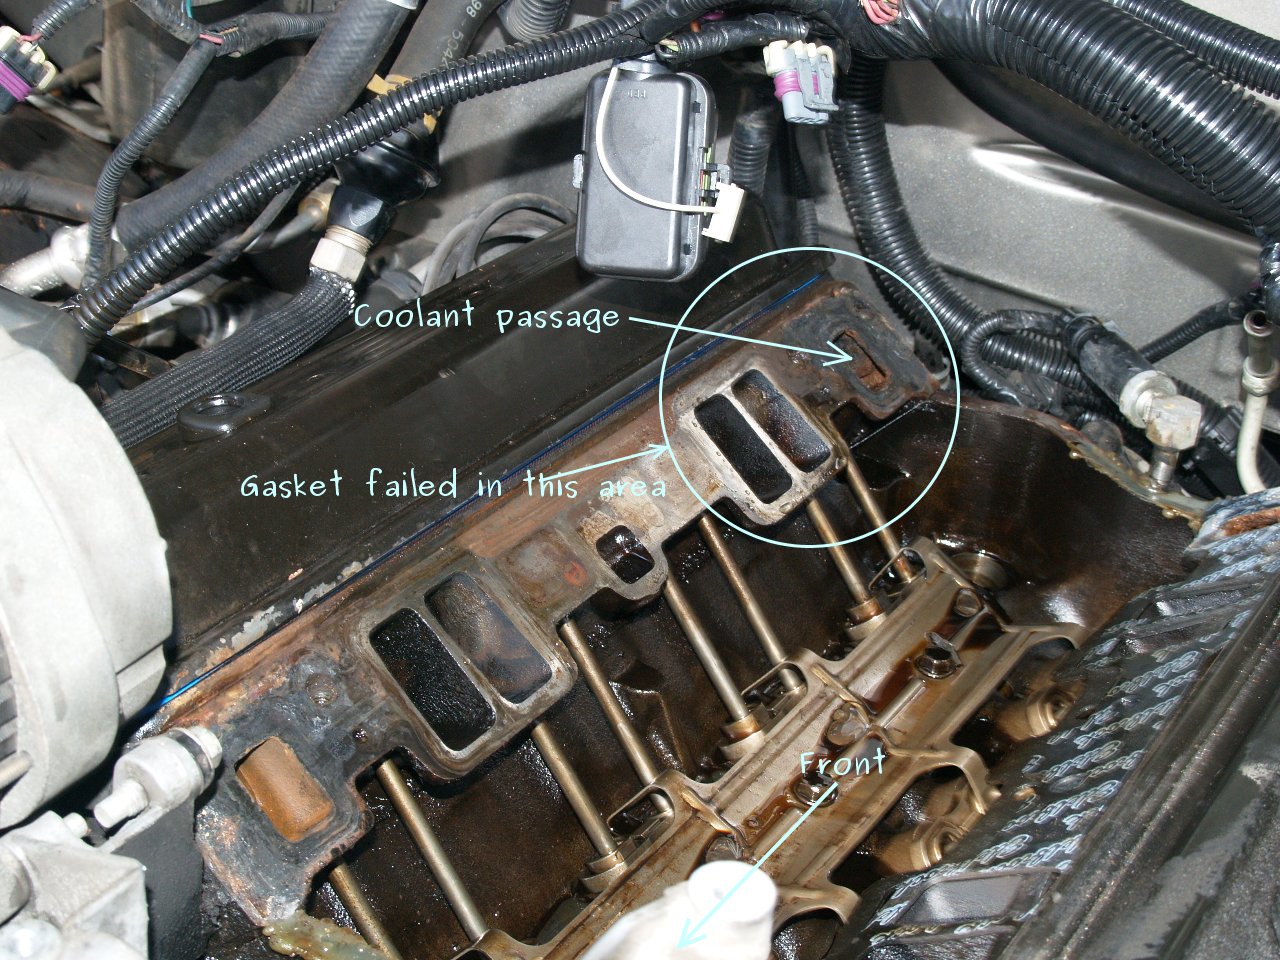 See P0001 in engine